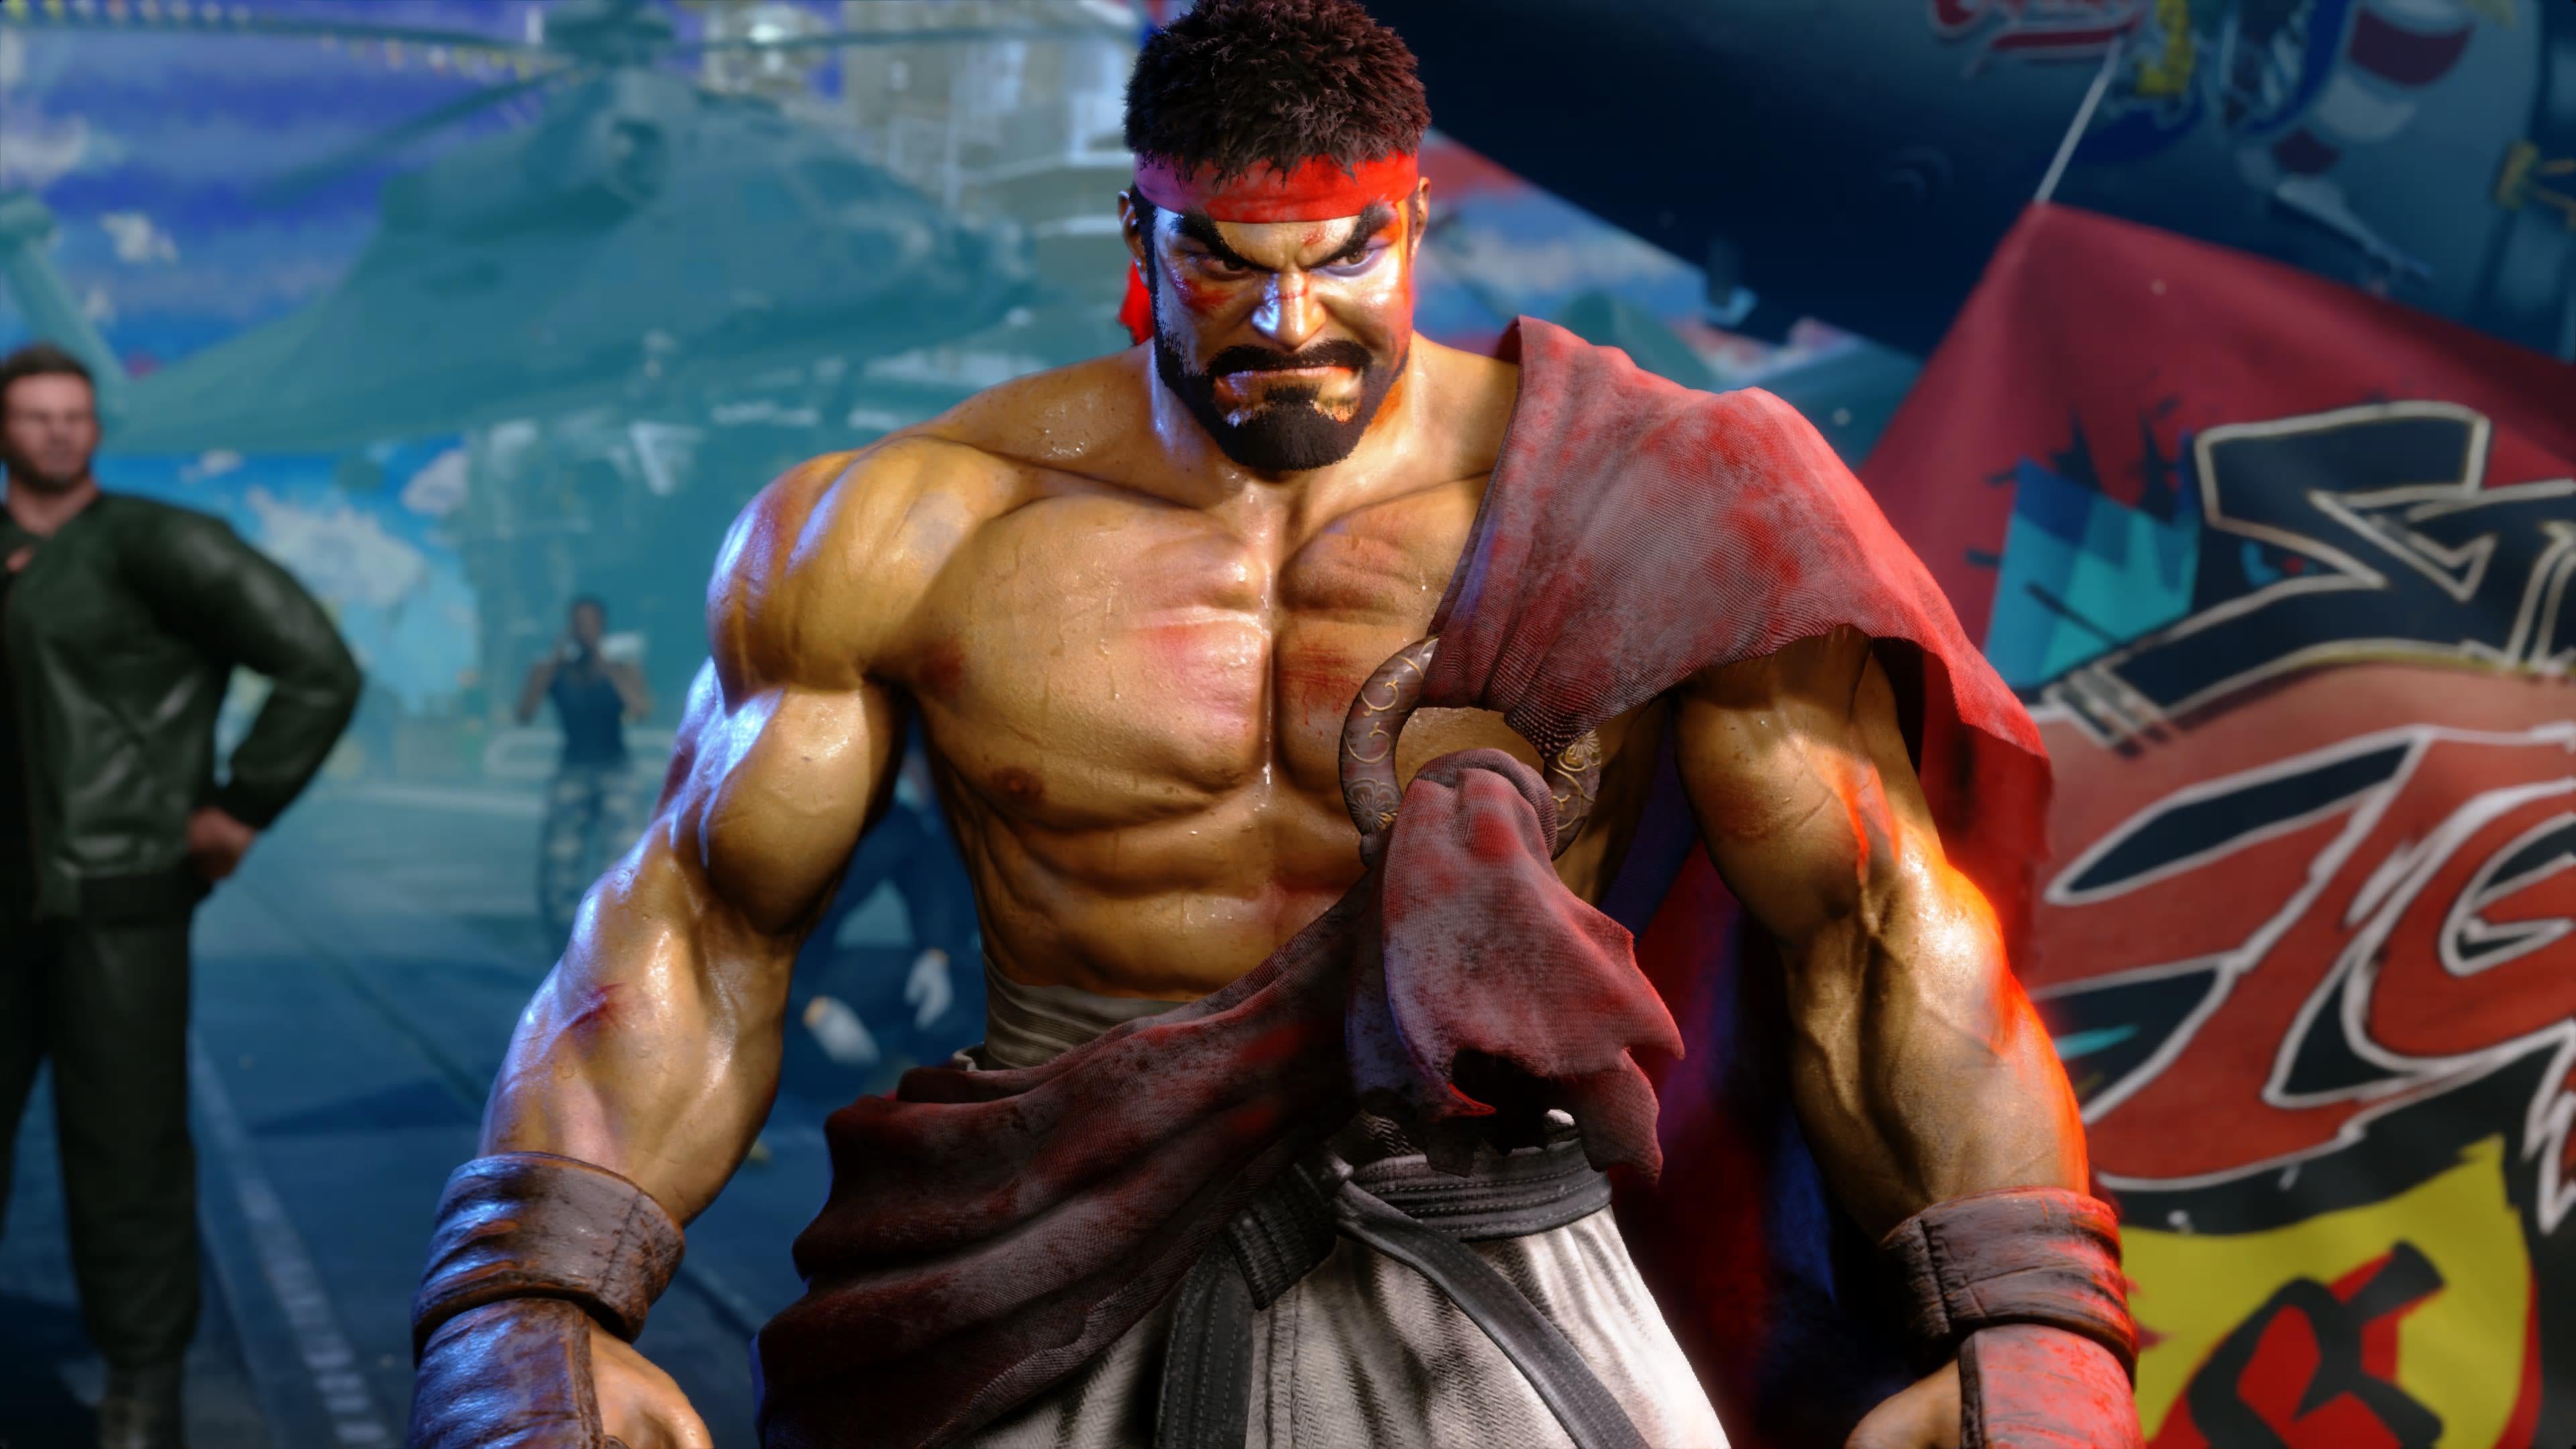 What Version of Street Fighter V Should You Buy?